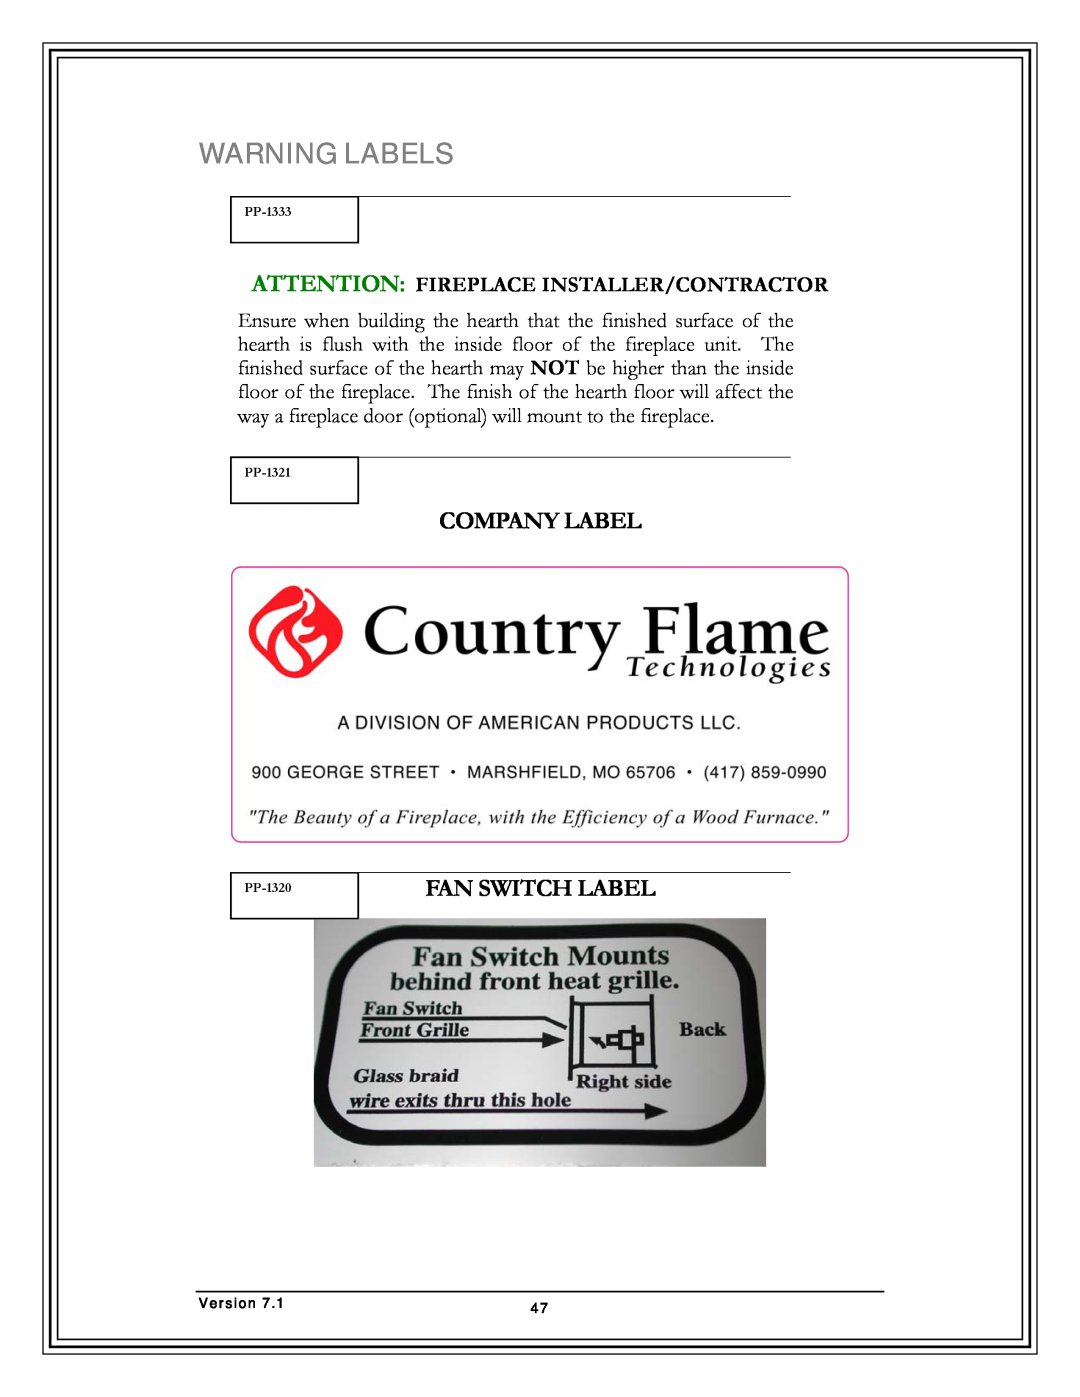 Country Flame FP37, FP42, Fireplace FP33 manual Warning Labels, Company Label, Fan Switch Label 